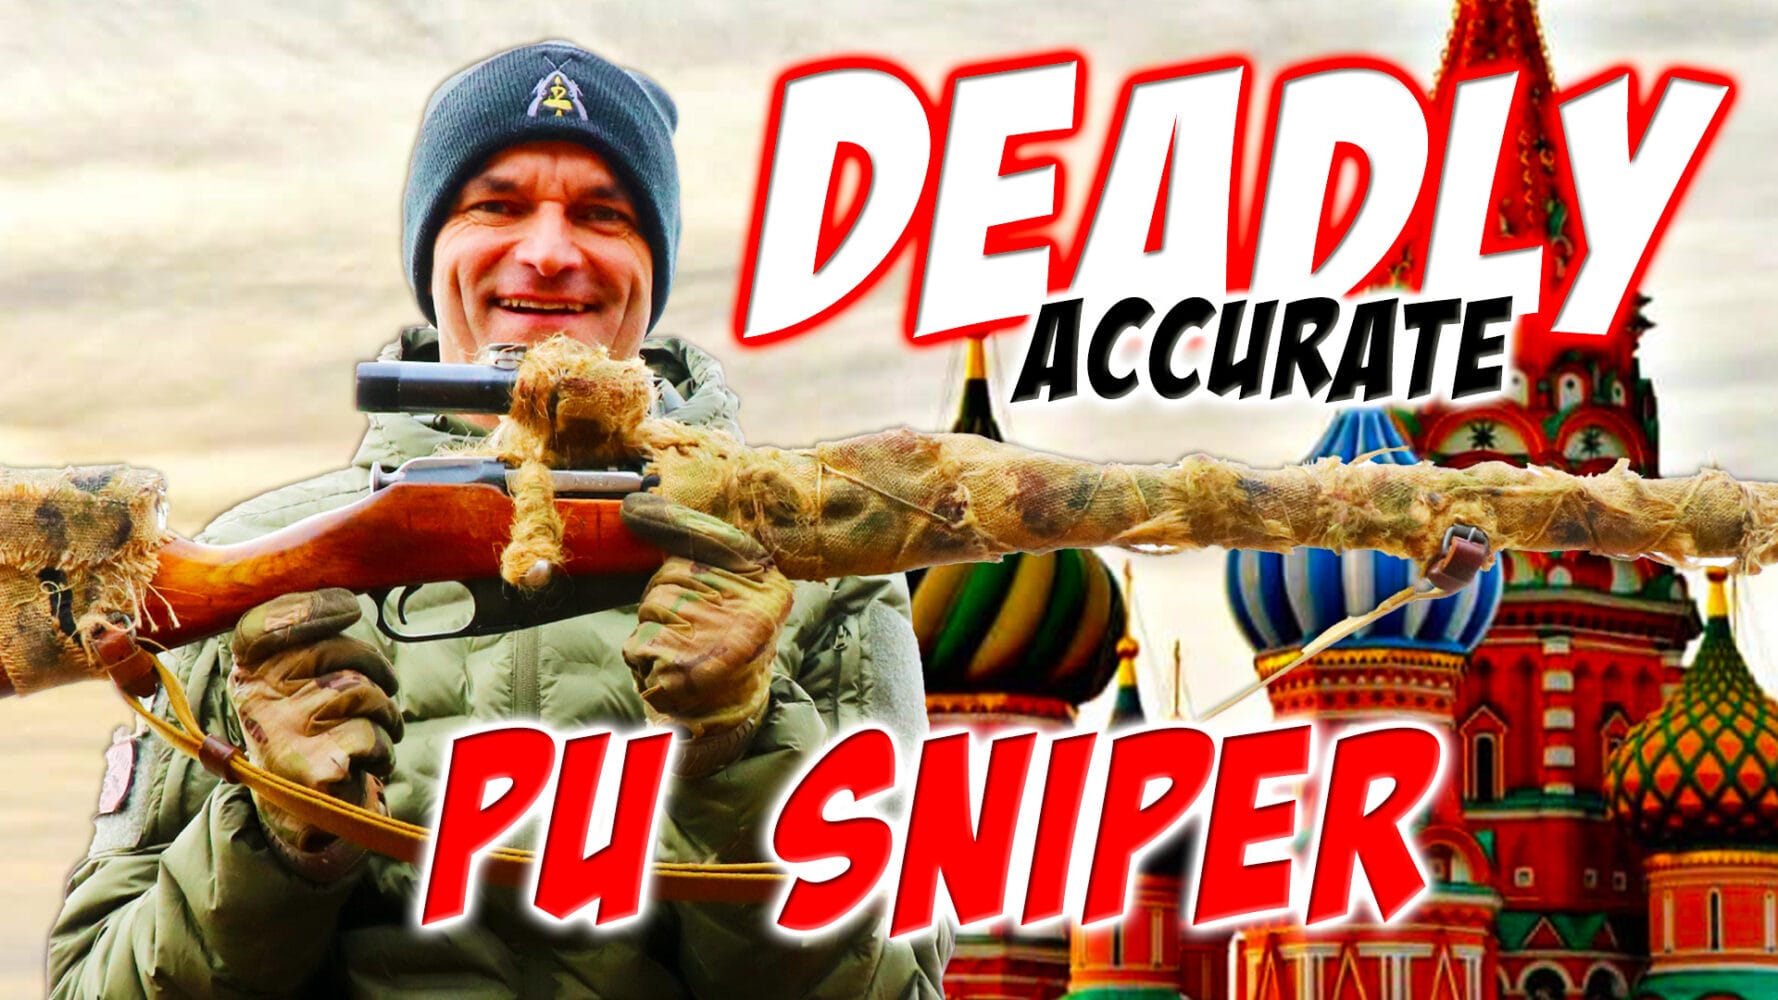 Shots Fired: Deadly Accuracy of the Mosin PU Sniper Rifle! PU Sniper History!